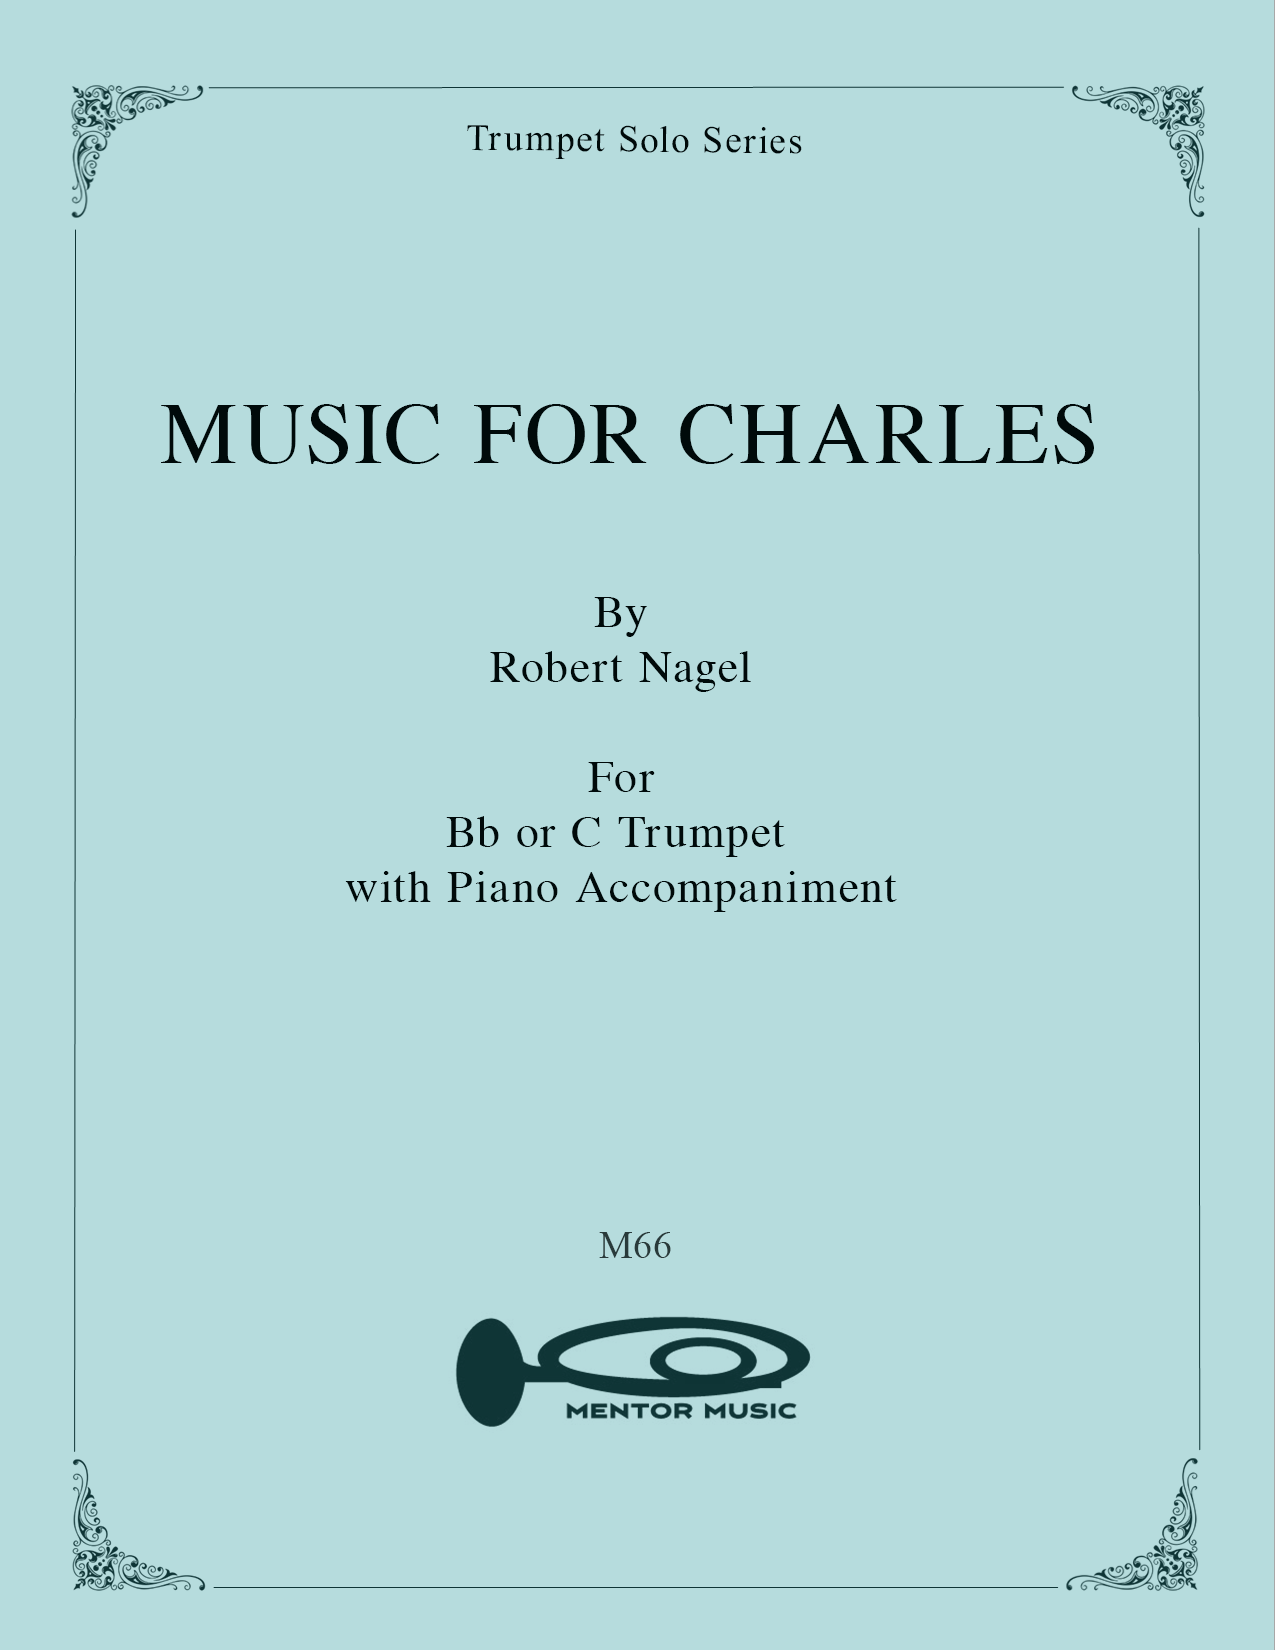 Music for Charles for Trumpet and Piano